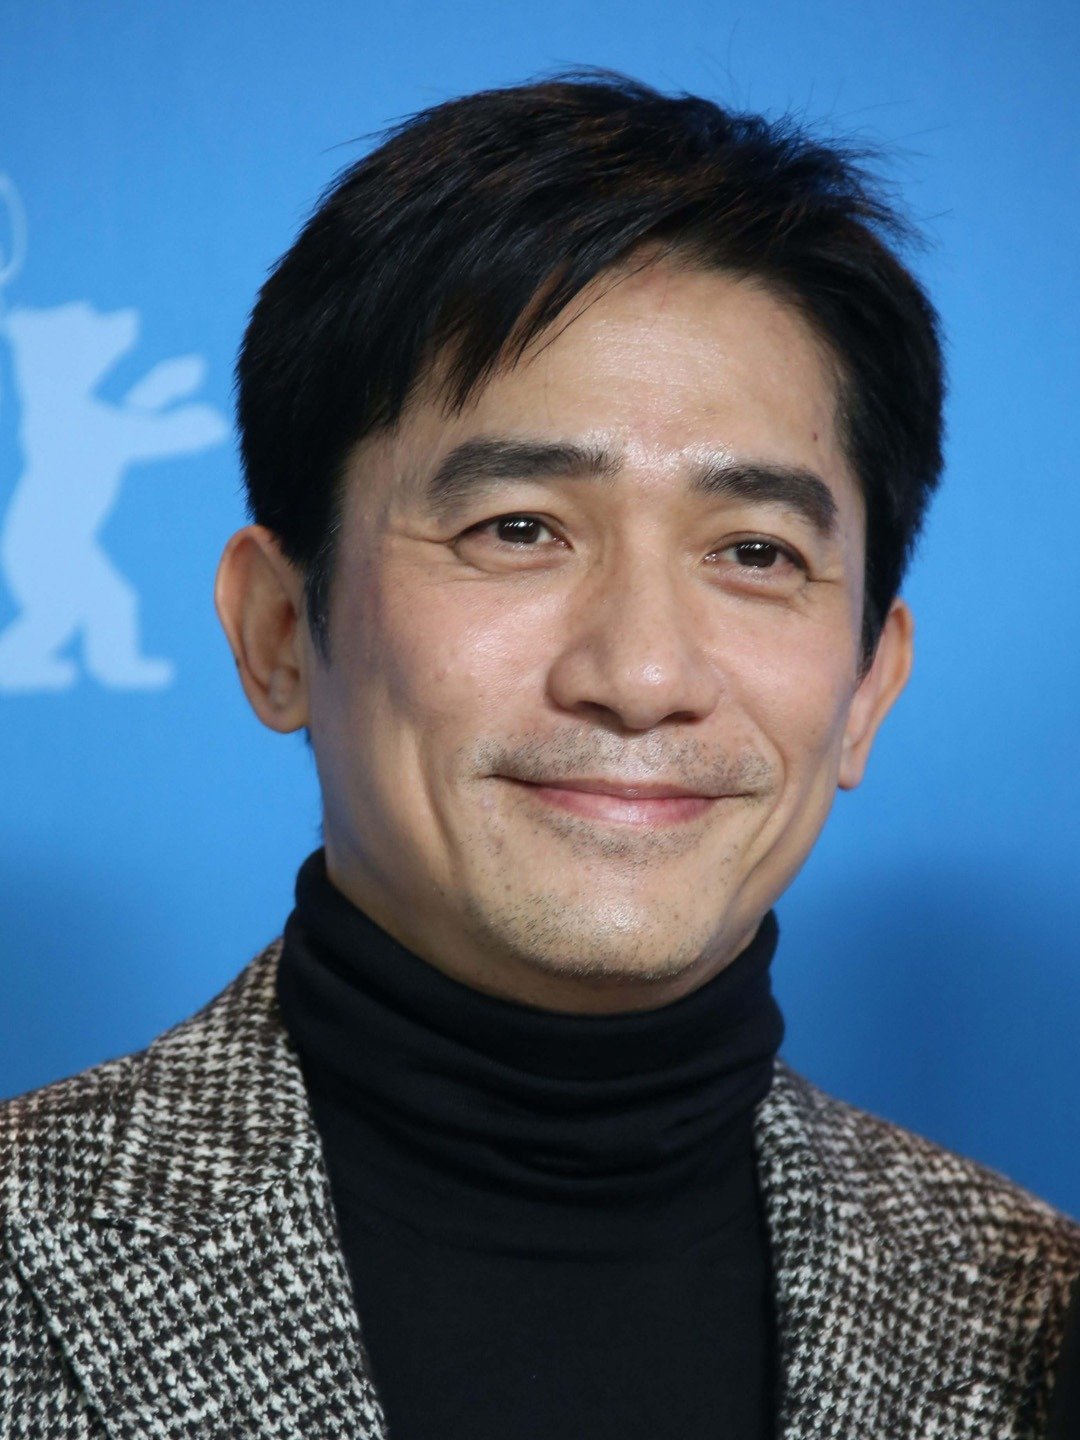 How tall is Tony Leung?